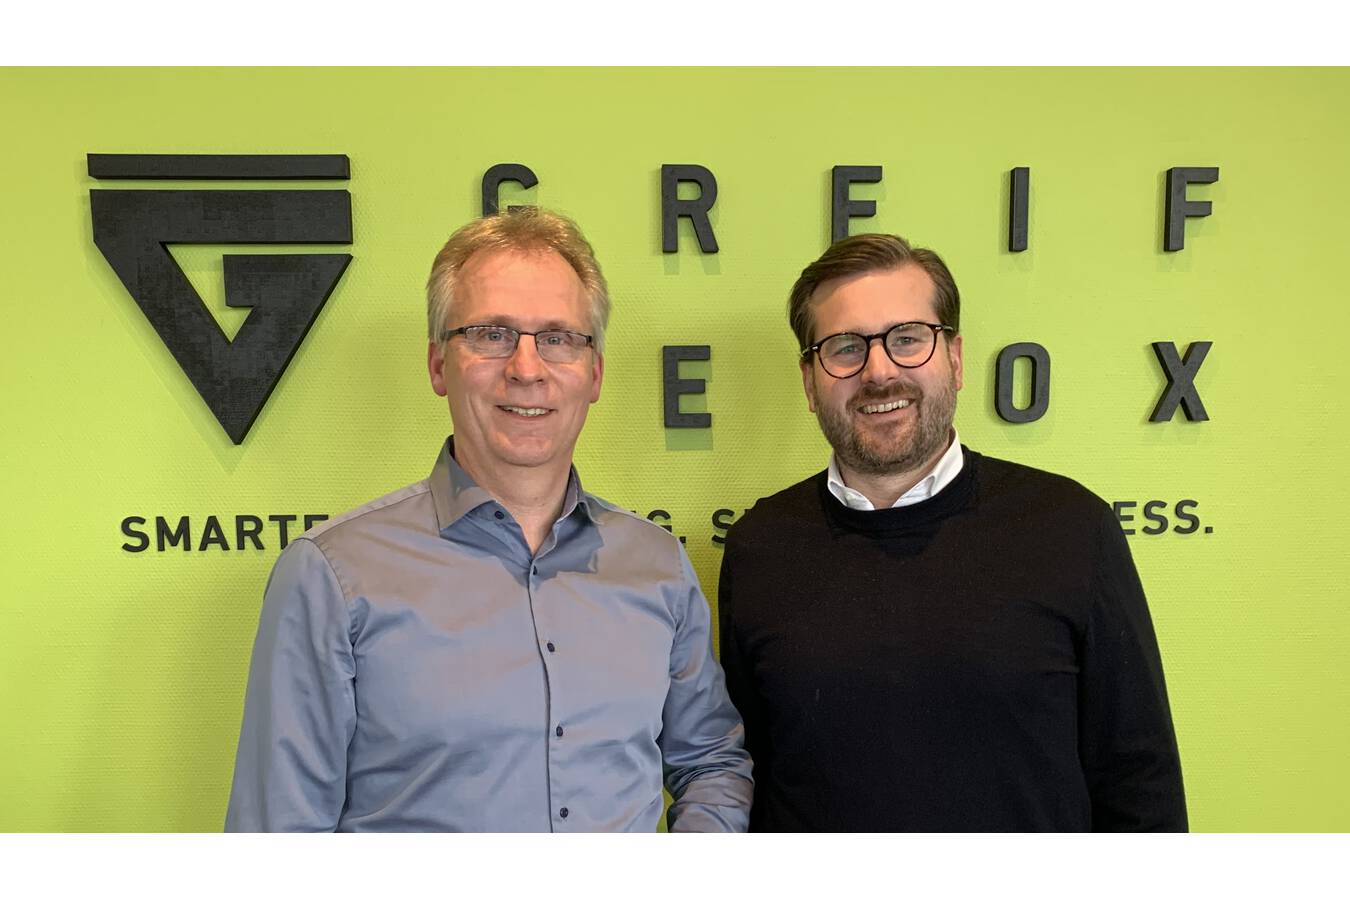 New Leadership at Greif-Velox There is a change at the helm of the packaging machinery manufacturer, Greif-Velox, based in Lübeck, Germany. Effective February 1, 2024, Sebastian Pohl, the former Director of Sales & Marketing, joins the management team alongside Thorsten Köll. 